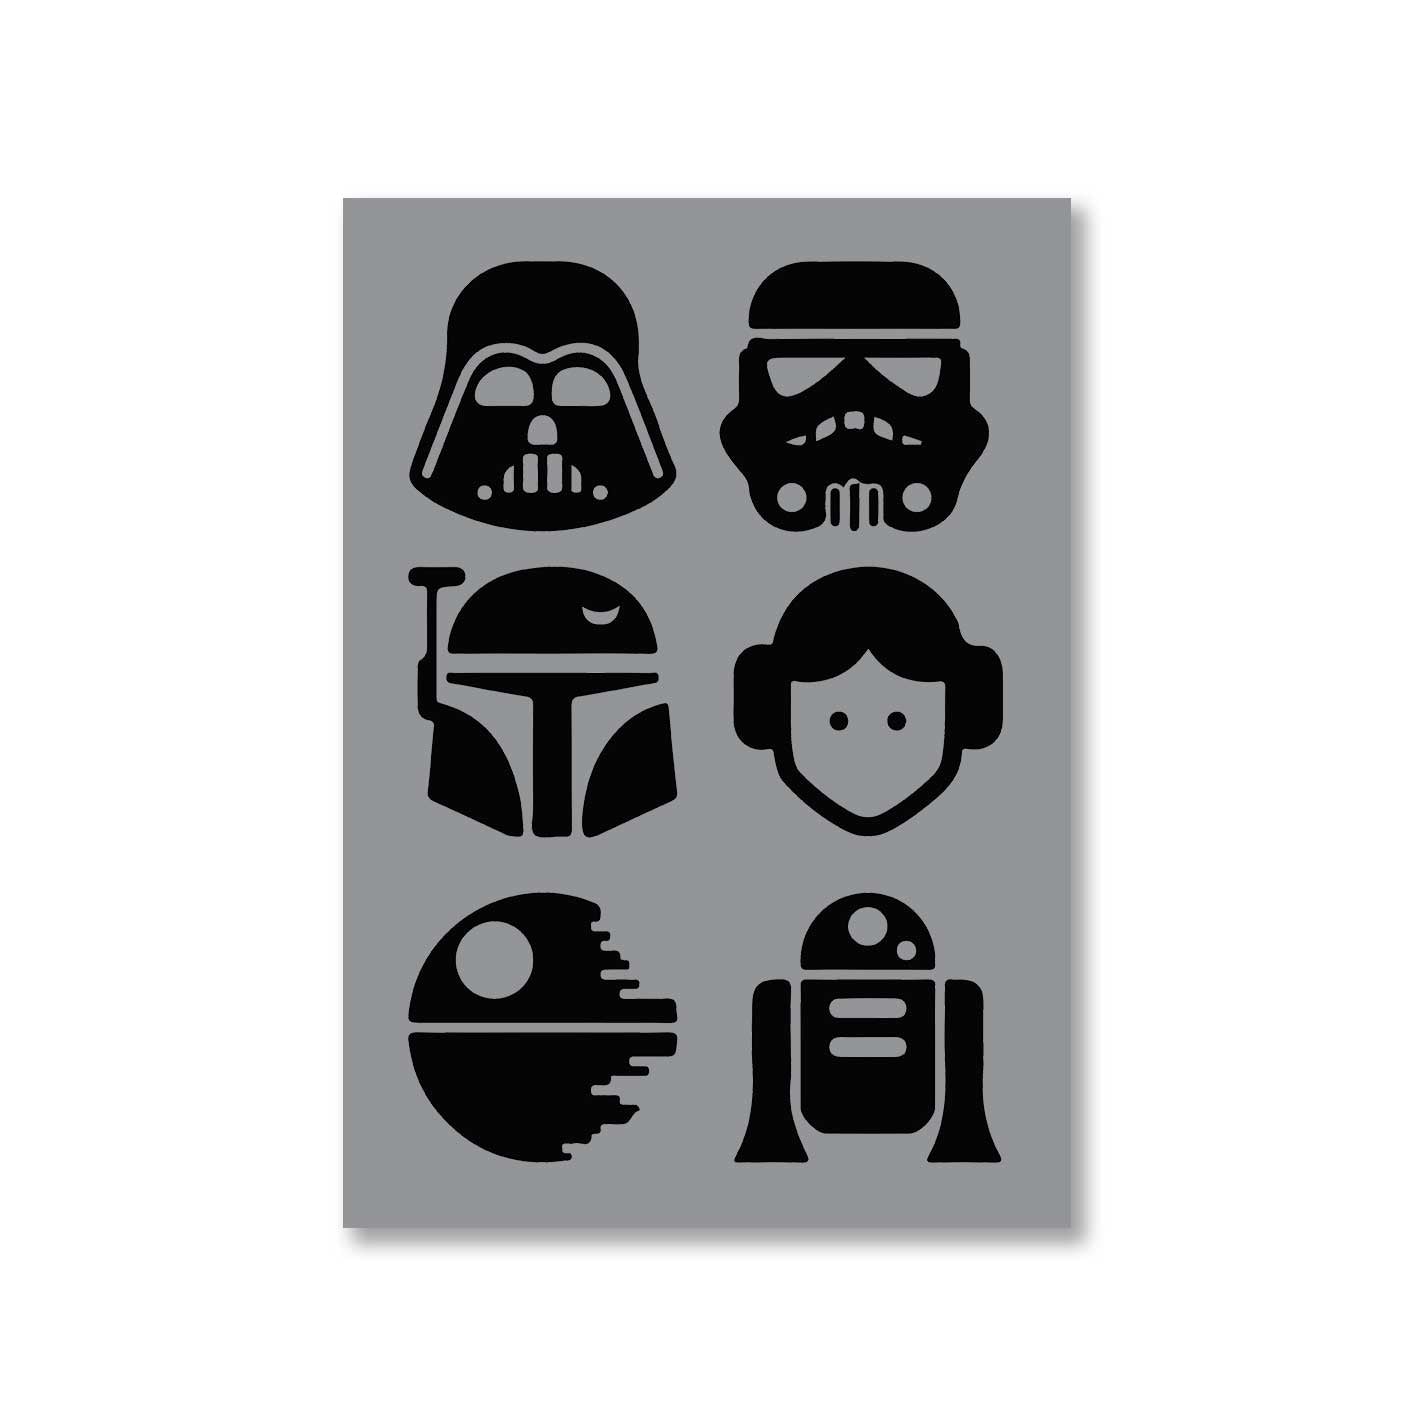 star wars star cast poster wall art buy online india the banyan tee tbt a4